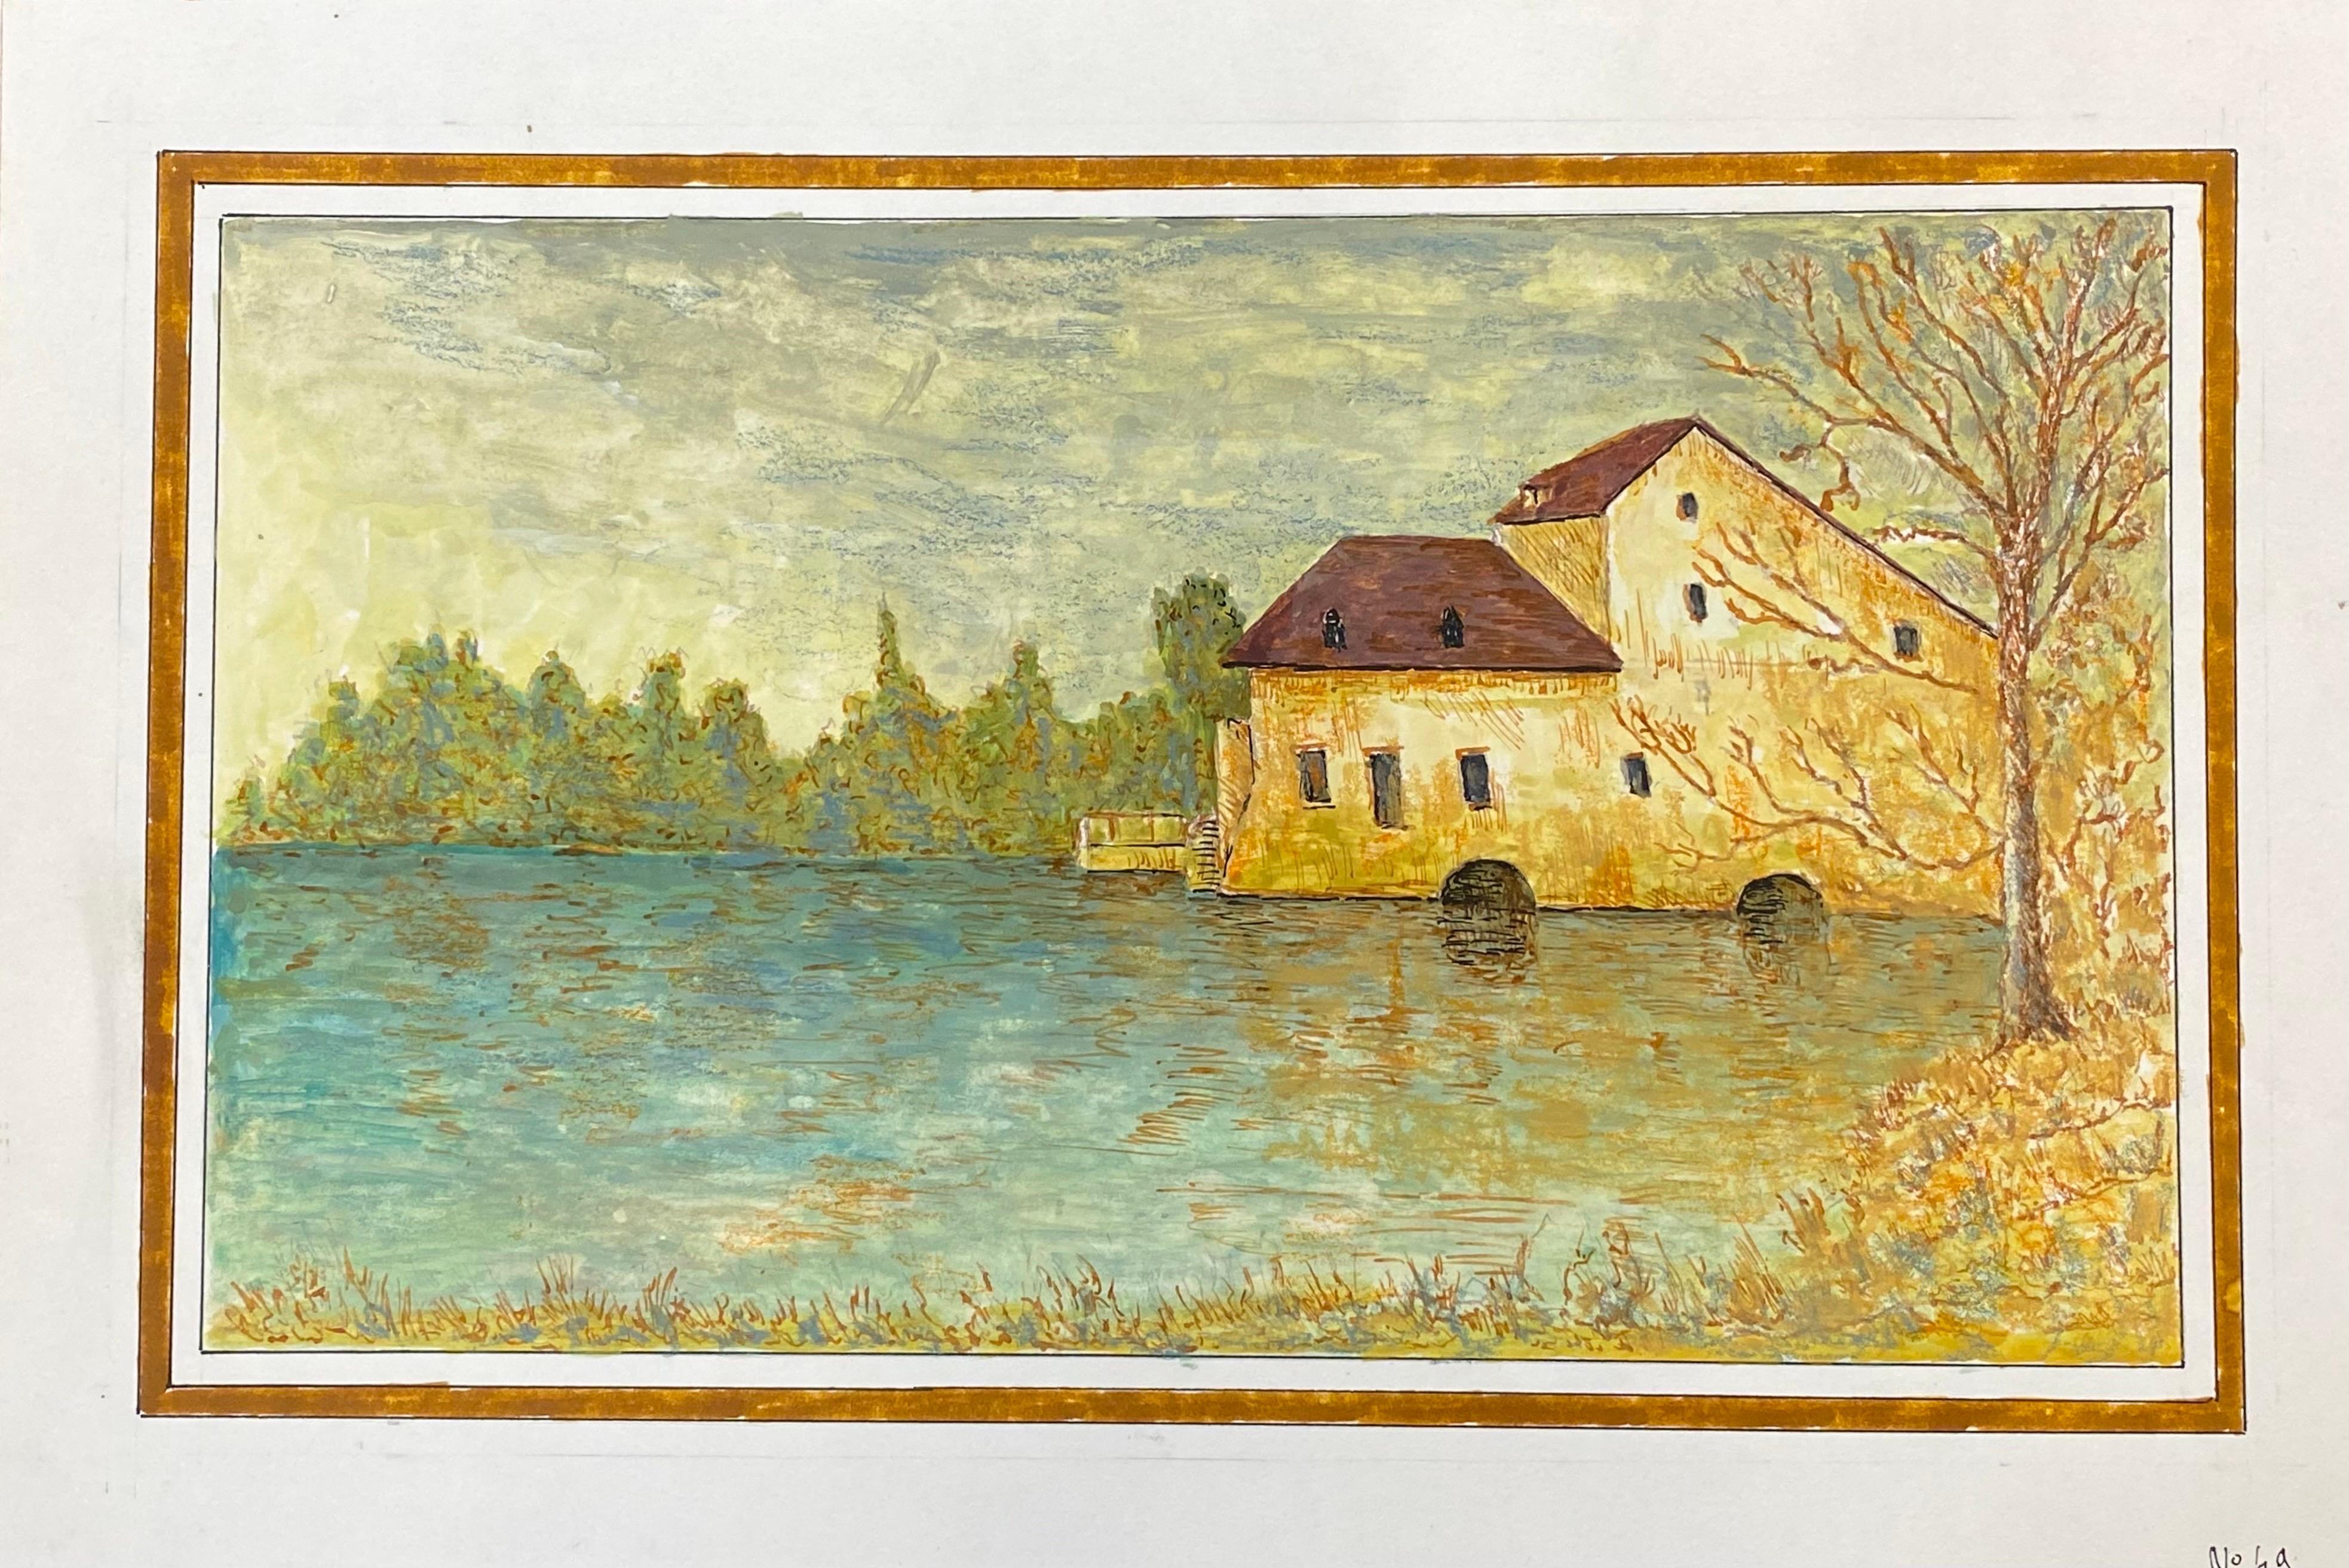 Lake scene.
by Bernard Labbe (French, mid-20th century), stamped verso.
Original watercolour/gouache painting on paper.
Overall size: 10 x 15 inches.
Condition: very good and ready to be enjoyed. 

Provenance: the artists atelier/ studio,